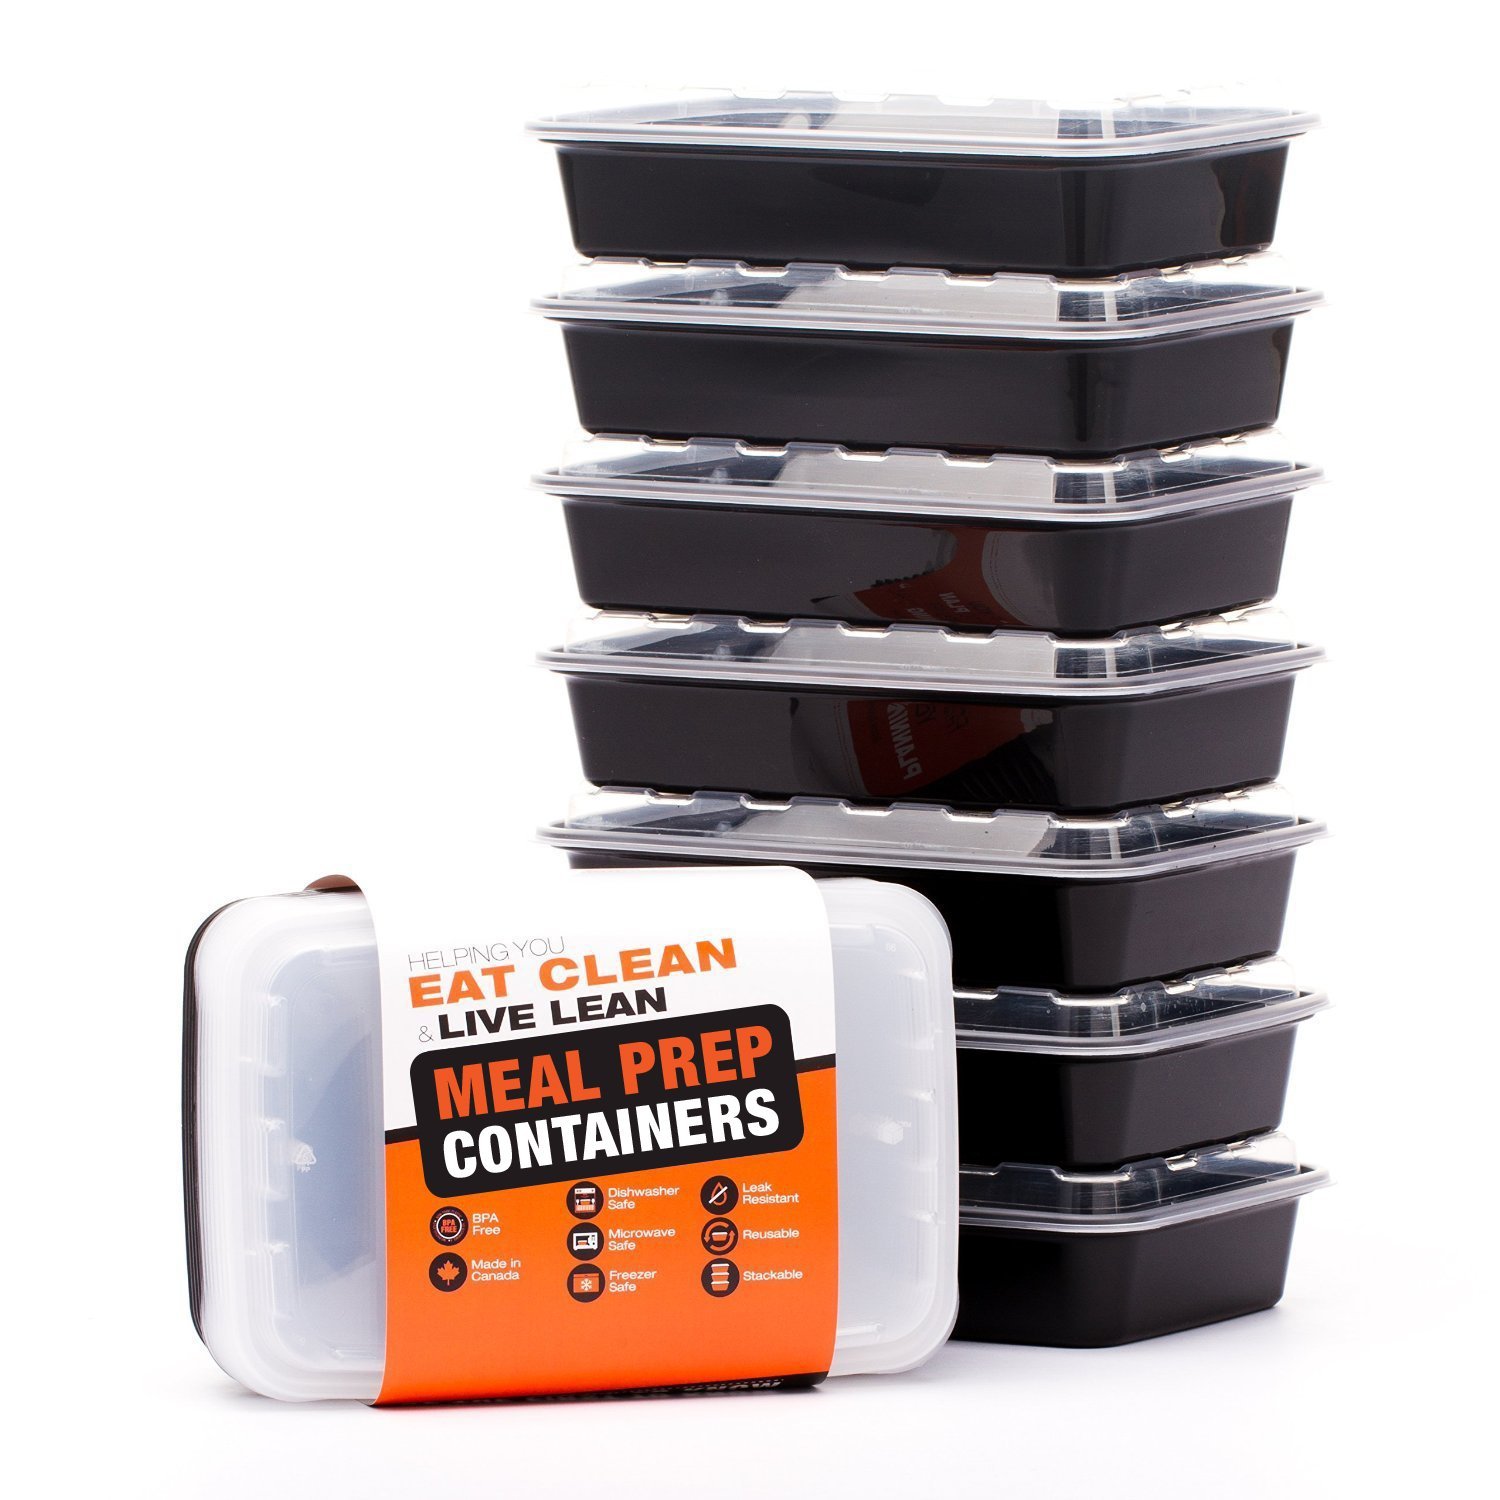 8-lift-certified-bpa-free-reusable-microwavable-meal-prep-containers-with-lids